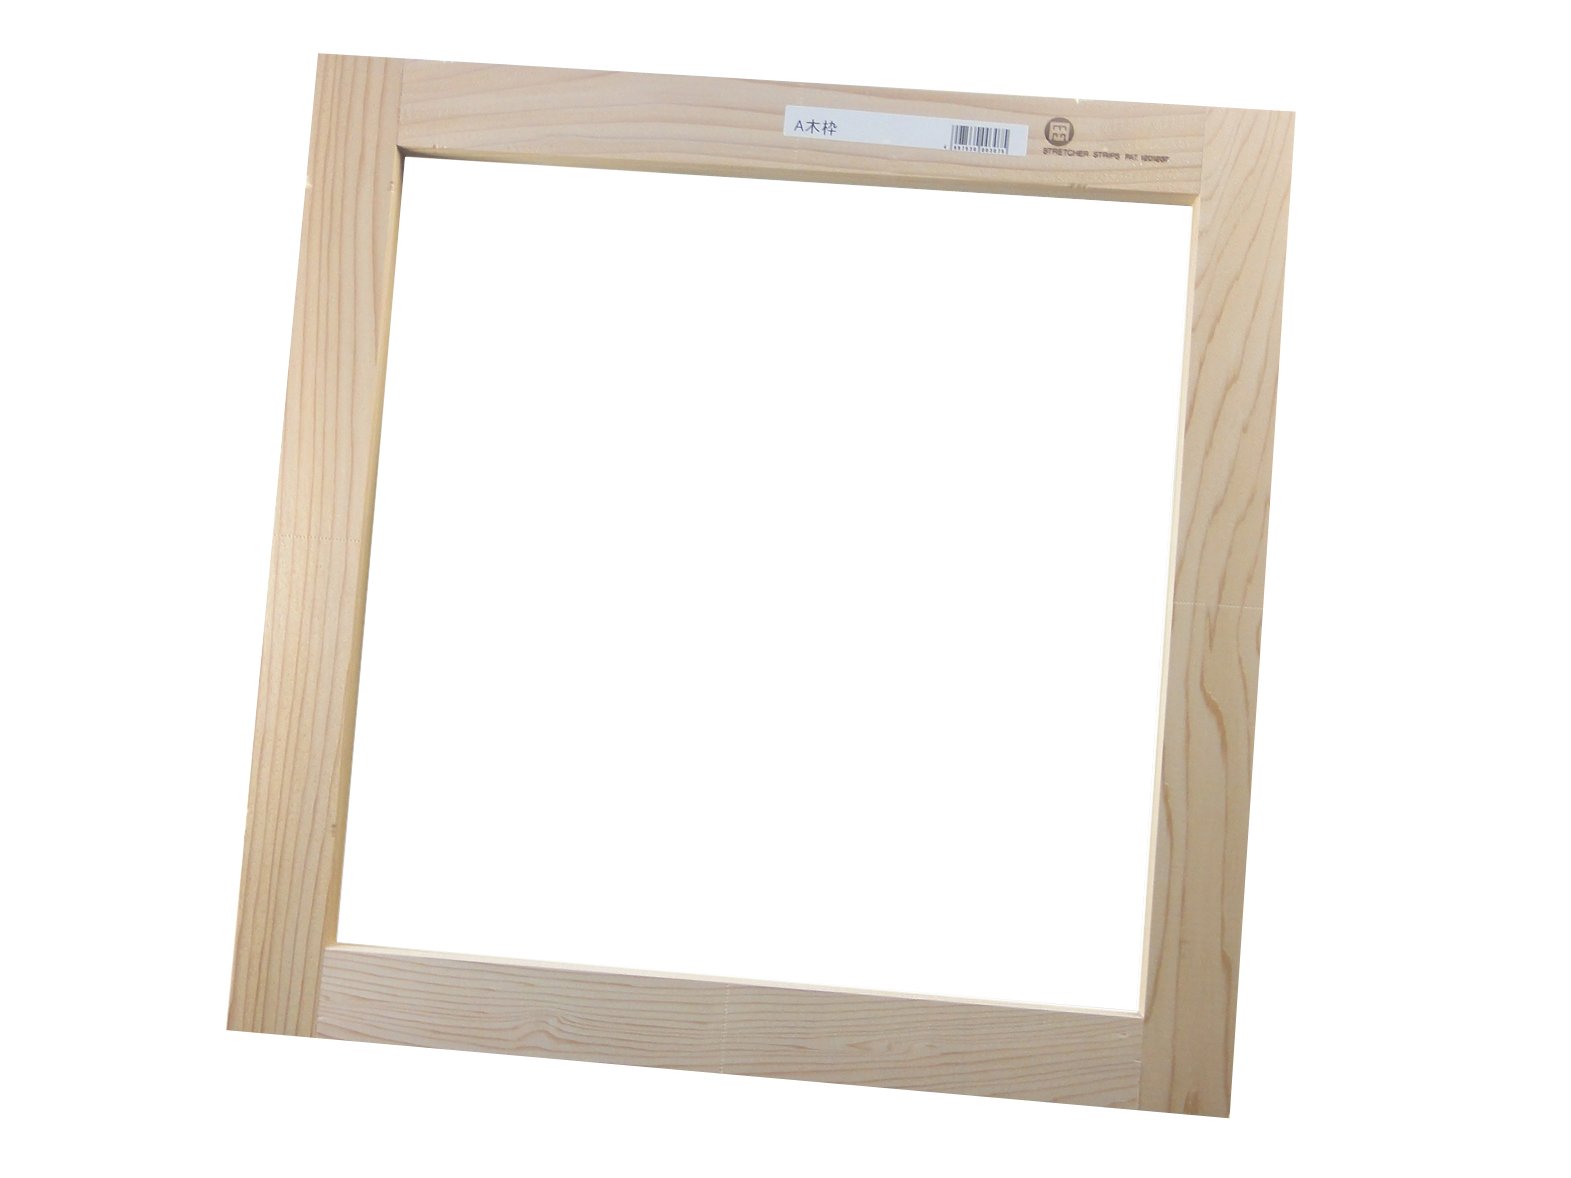 Maruoka Industries A Picture Frame S25